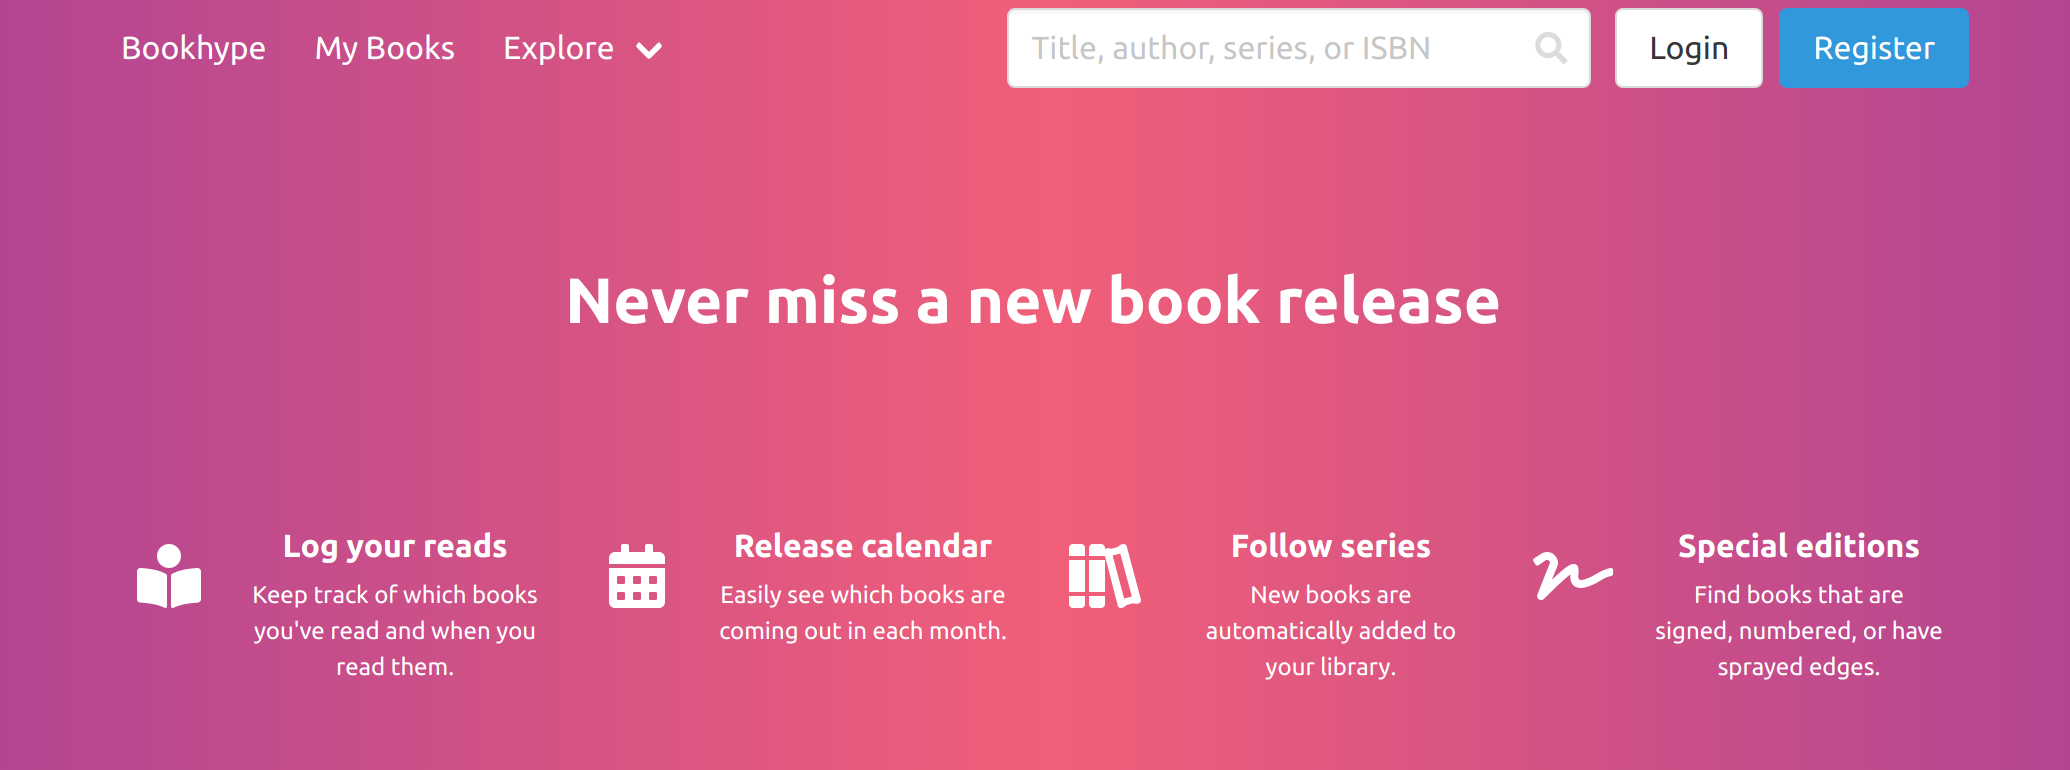 Bookhype - Never miss a new book release